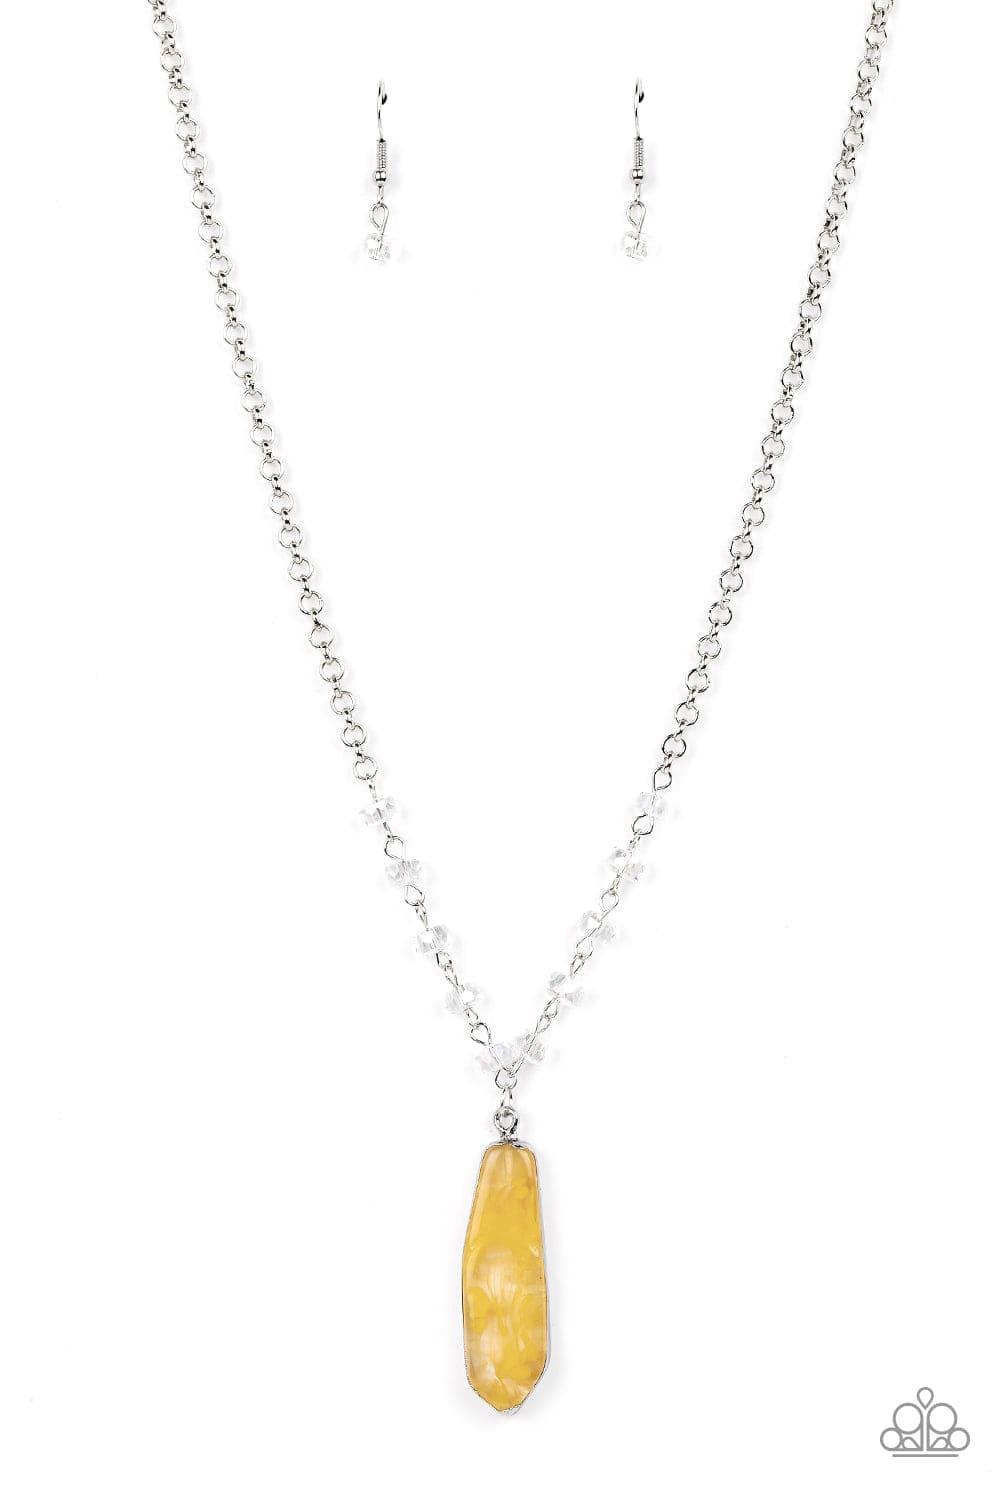 Paparazzi Accessories - Magical Remedy - Yellow Necklace - Bling by JessieK